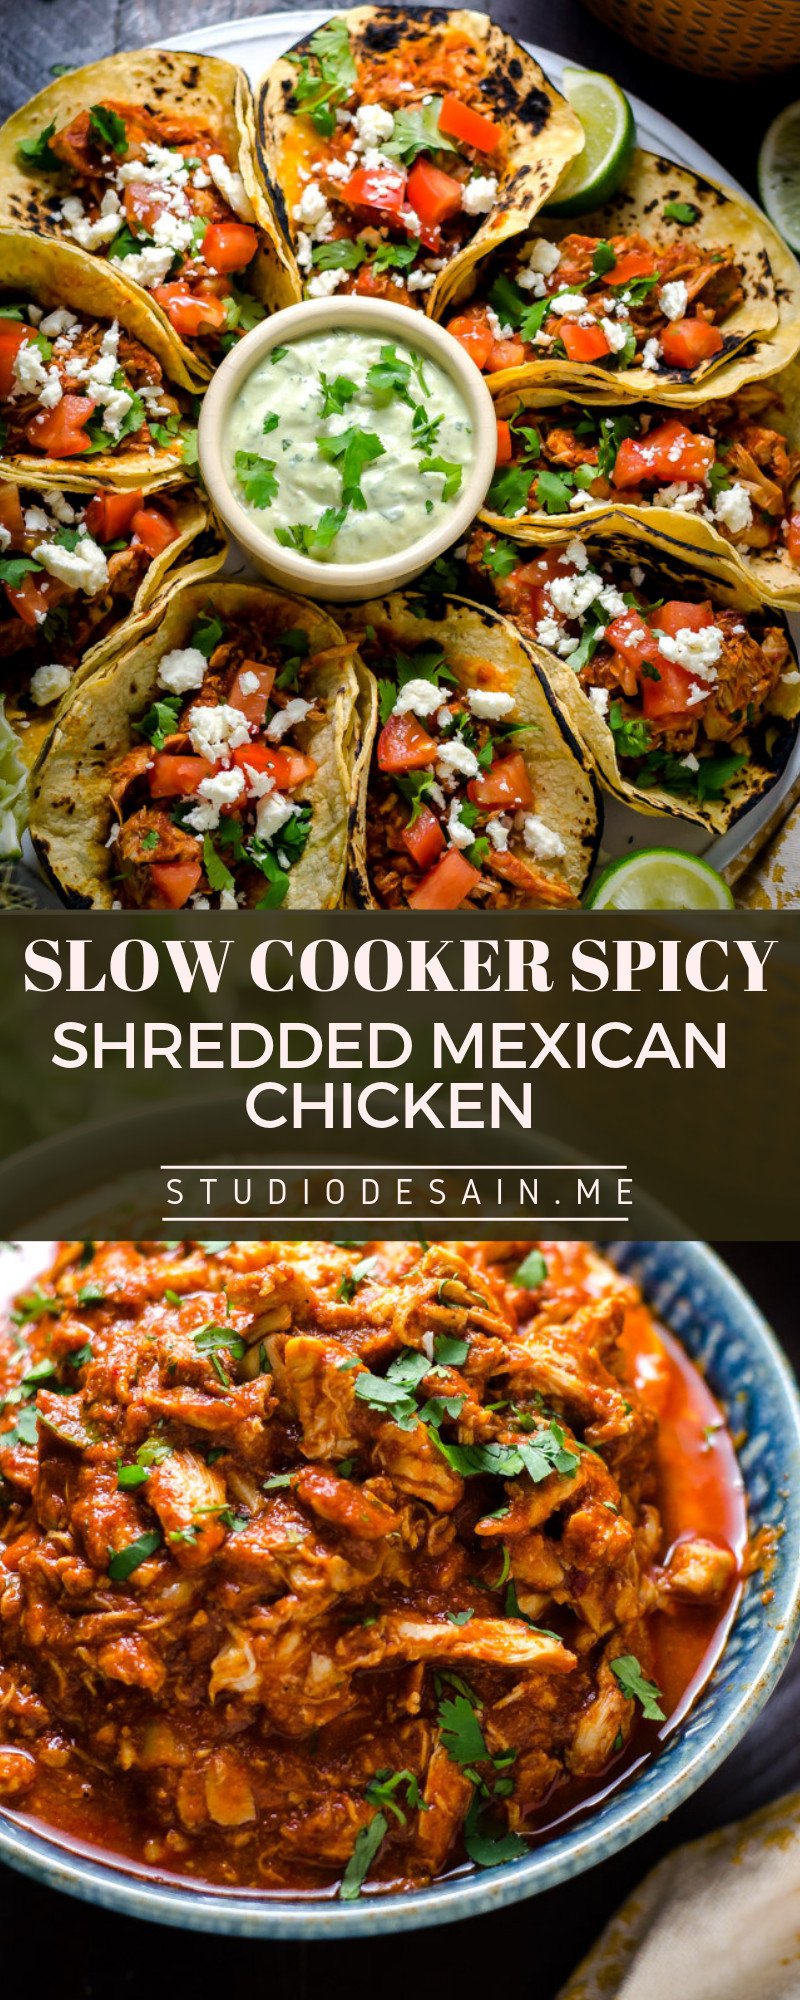 Shredded Chicken Mexican Casserole
 SLOW COOKER SPICY SHREDDED MEXICAN CHICKEN